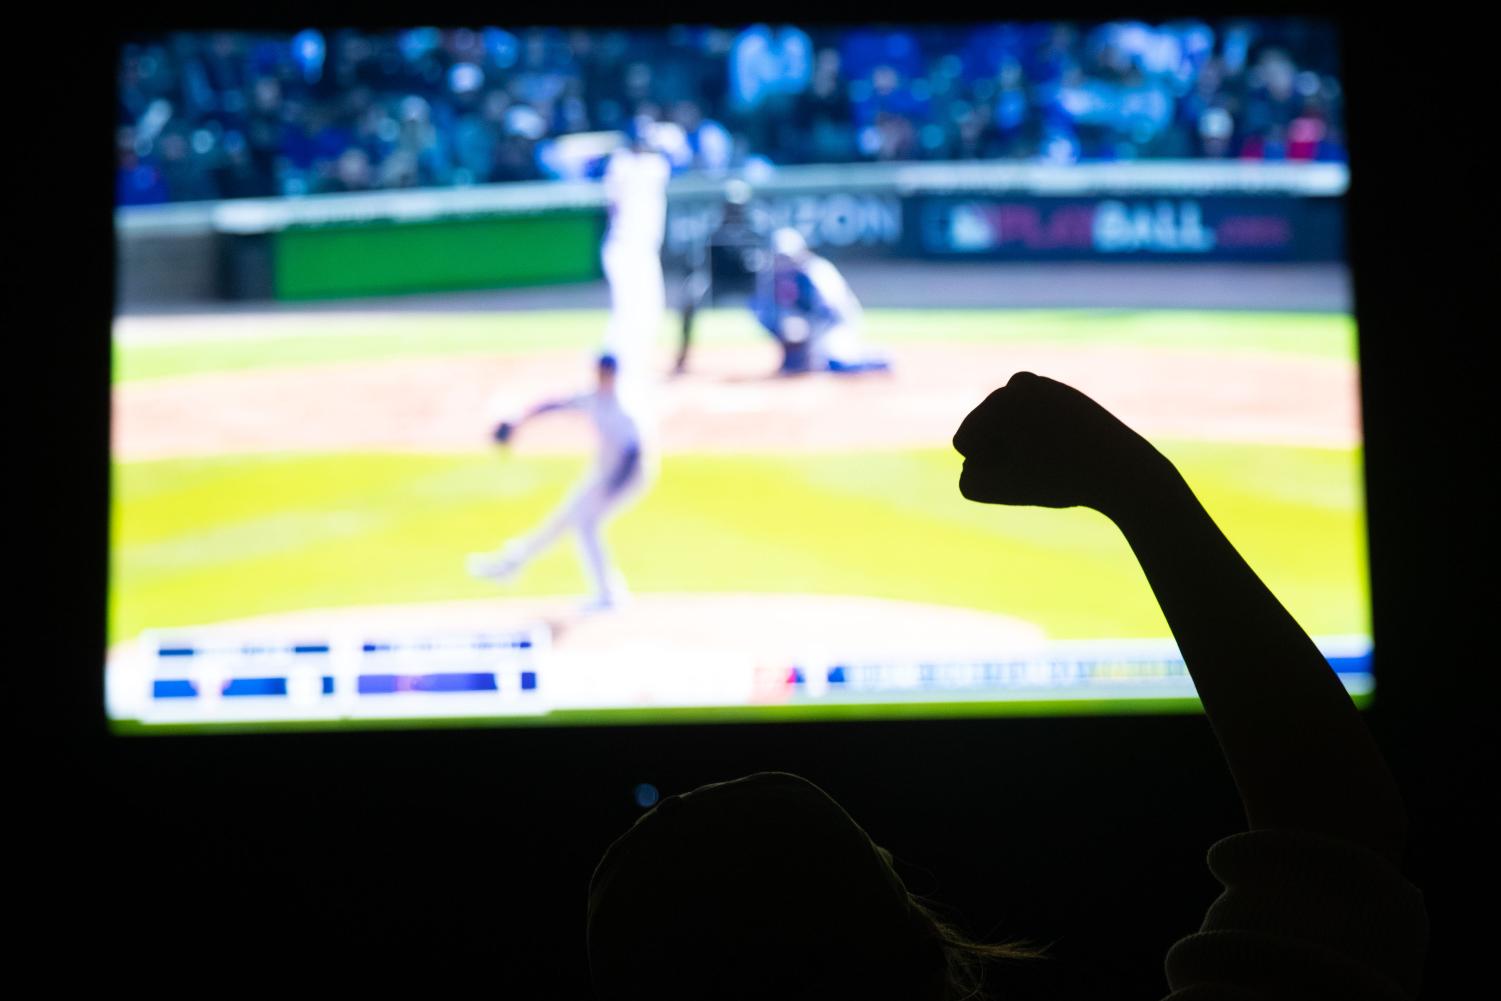 Opinion MLB needs to get rid of blackout restrictions